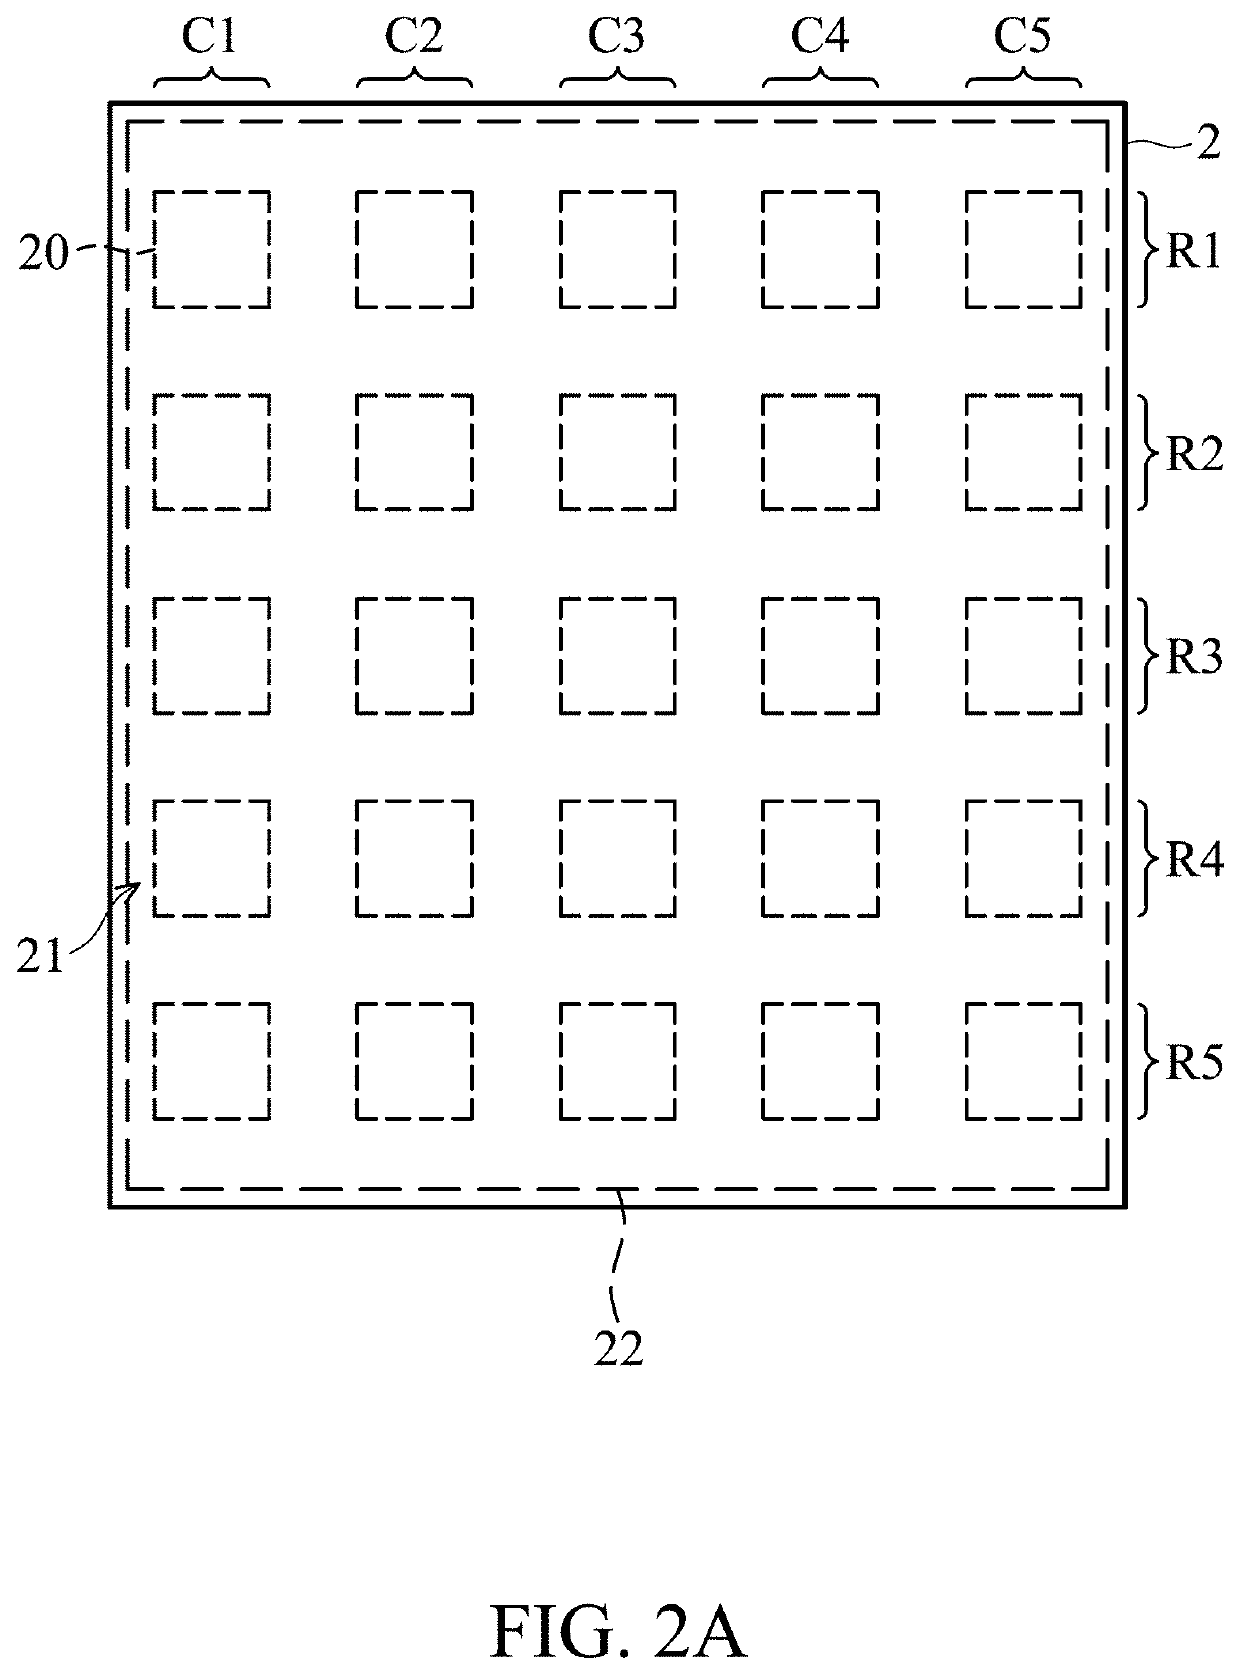 Active pixel sensor with sensing circuits and output circuits disposed on the same substrate